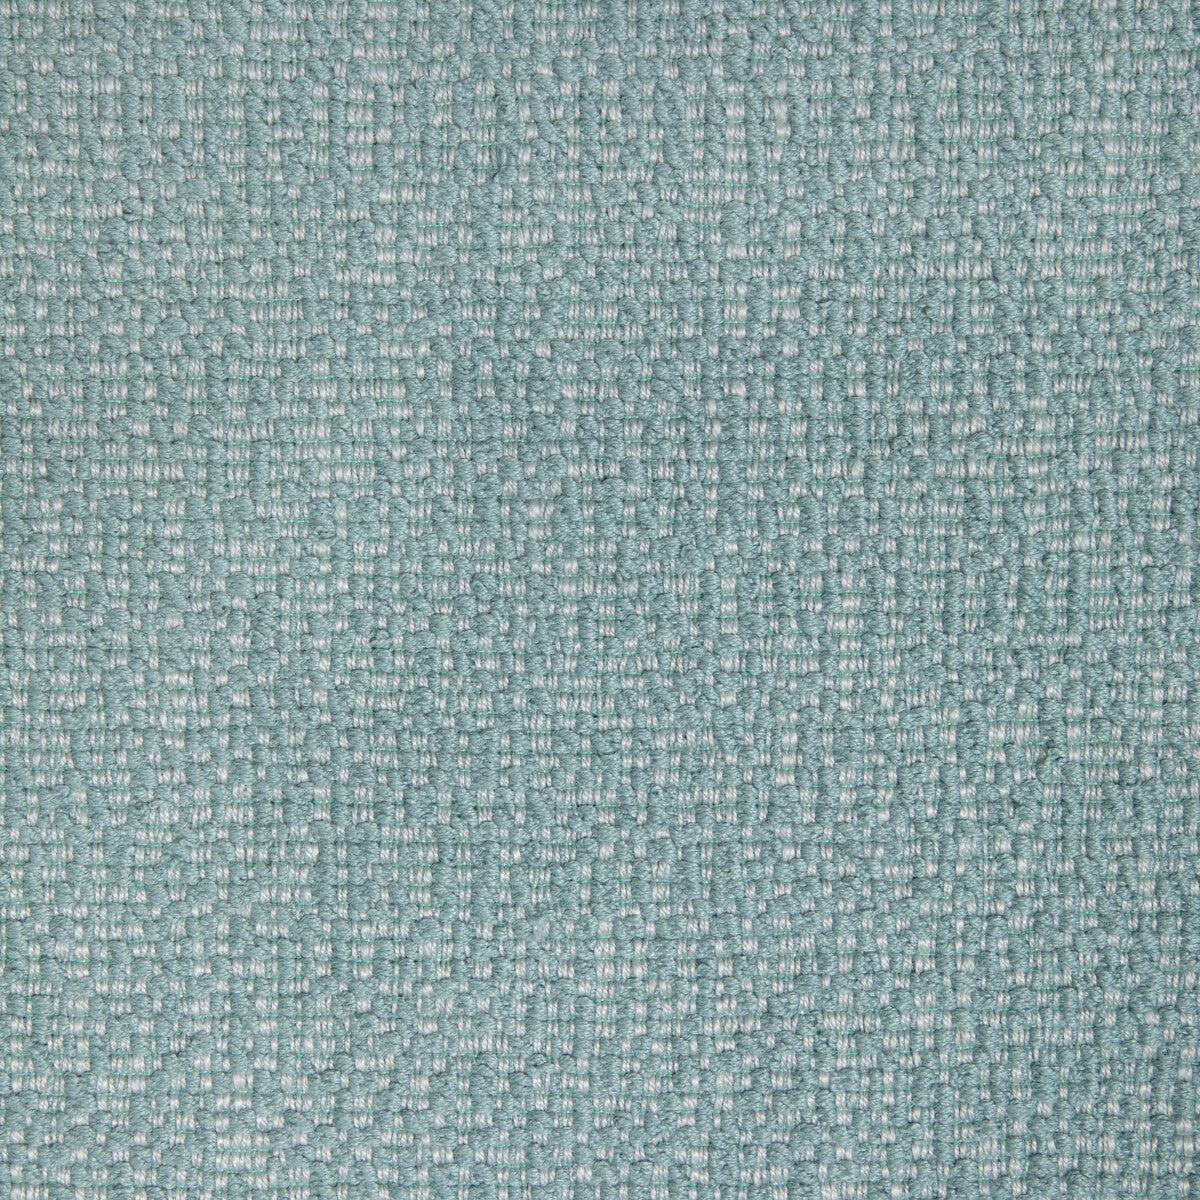 Kravet Design fabric in 36886-115 color - pattern 36886.115.0 - by Kravet Design in the Inside Out Performance Fabrics collection